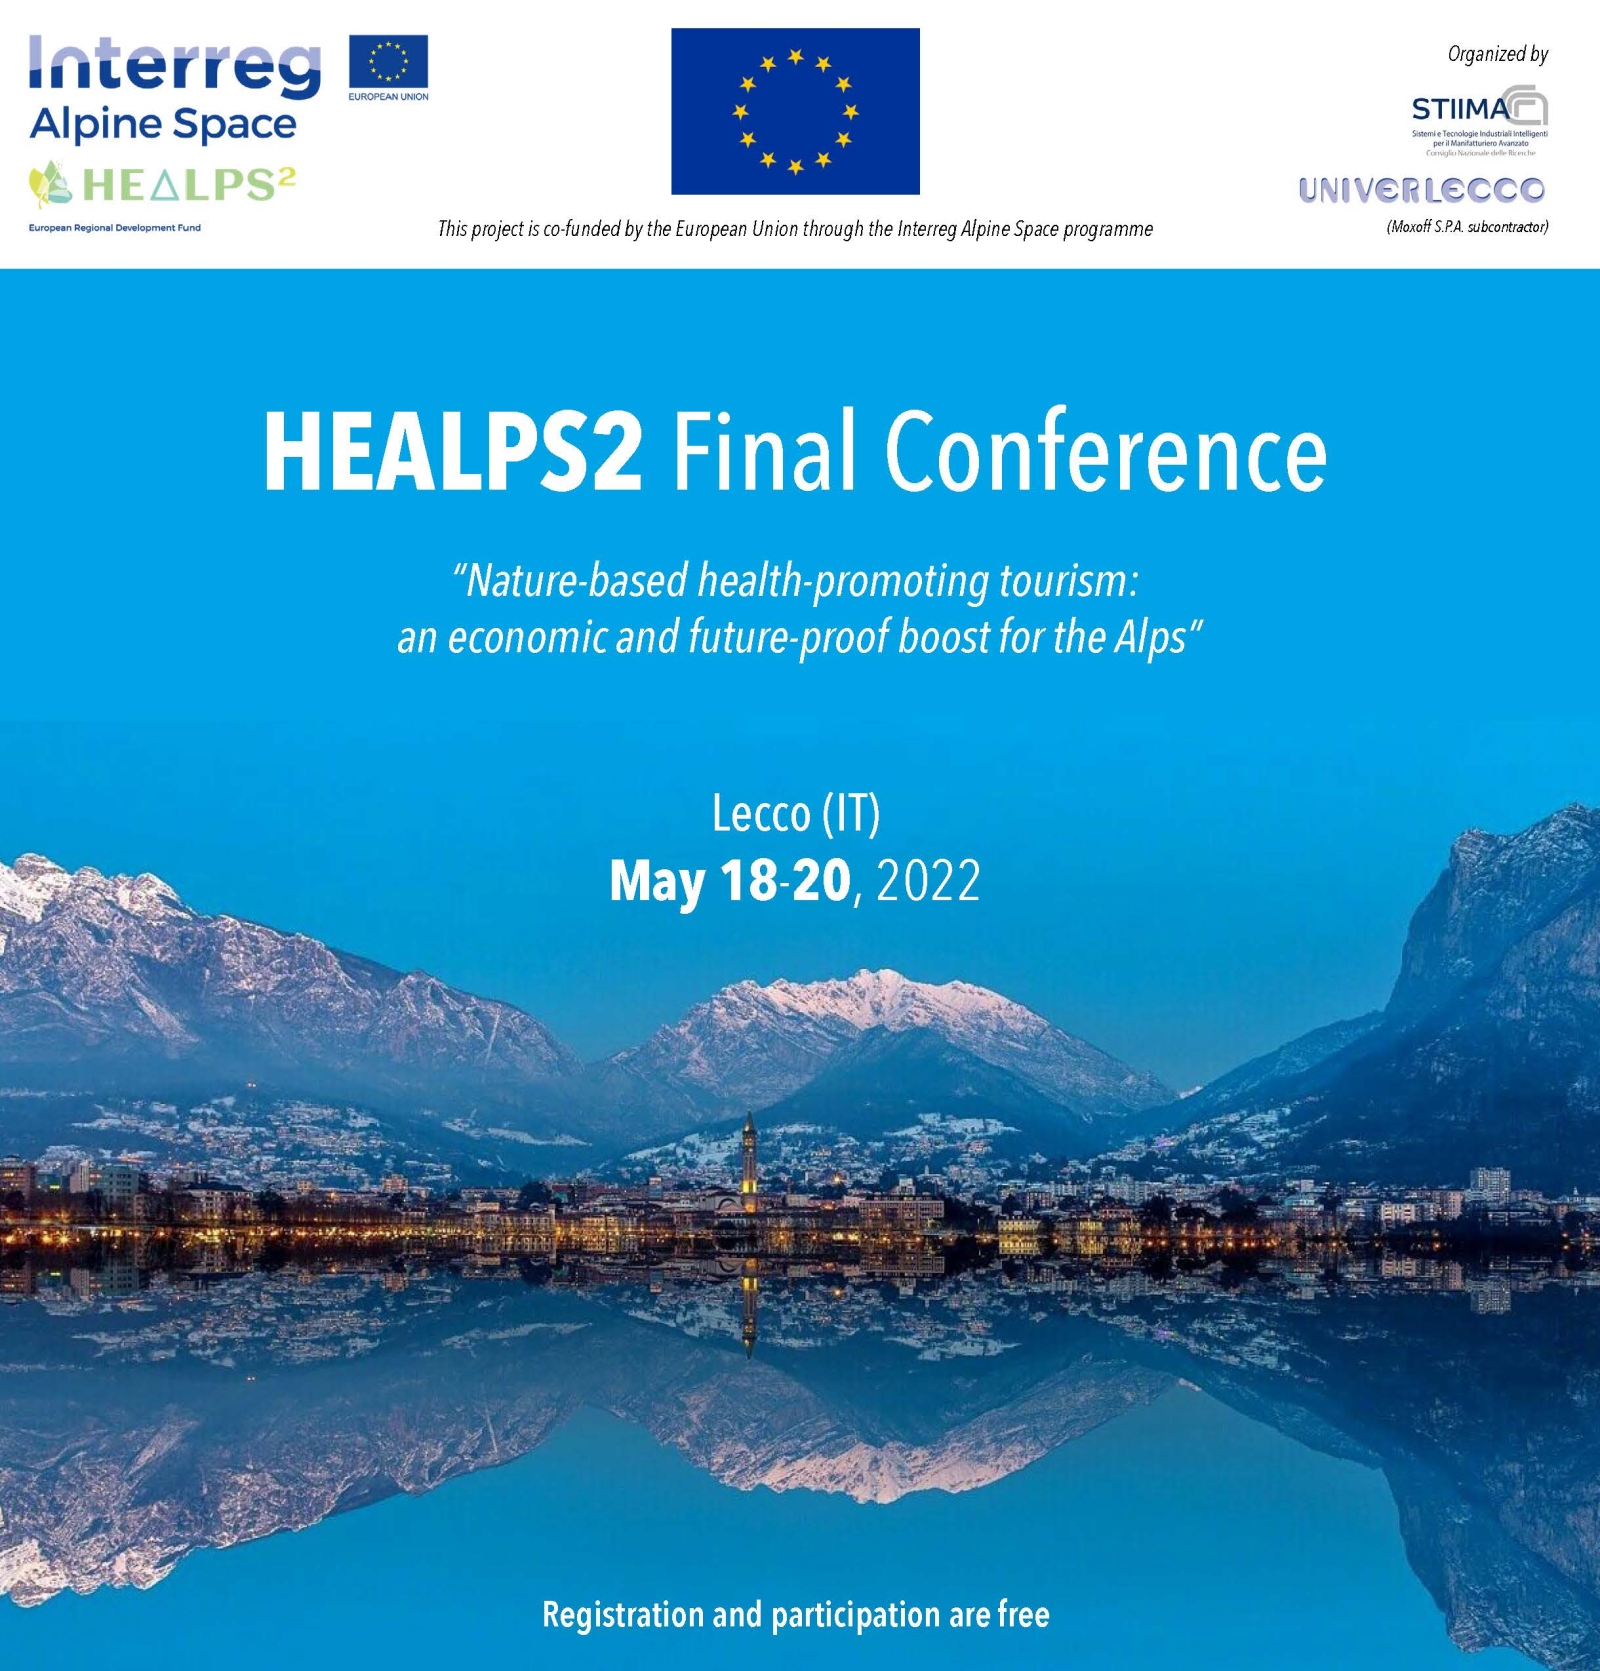 HEALPS2 Final Conference in Lecco (IT)